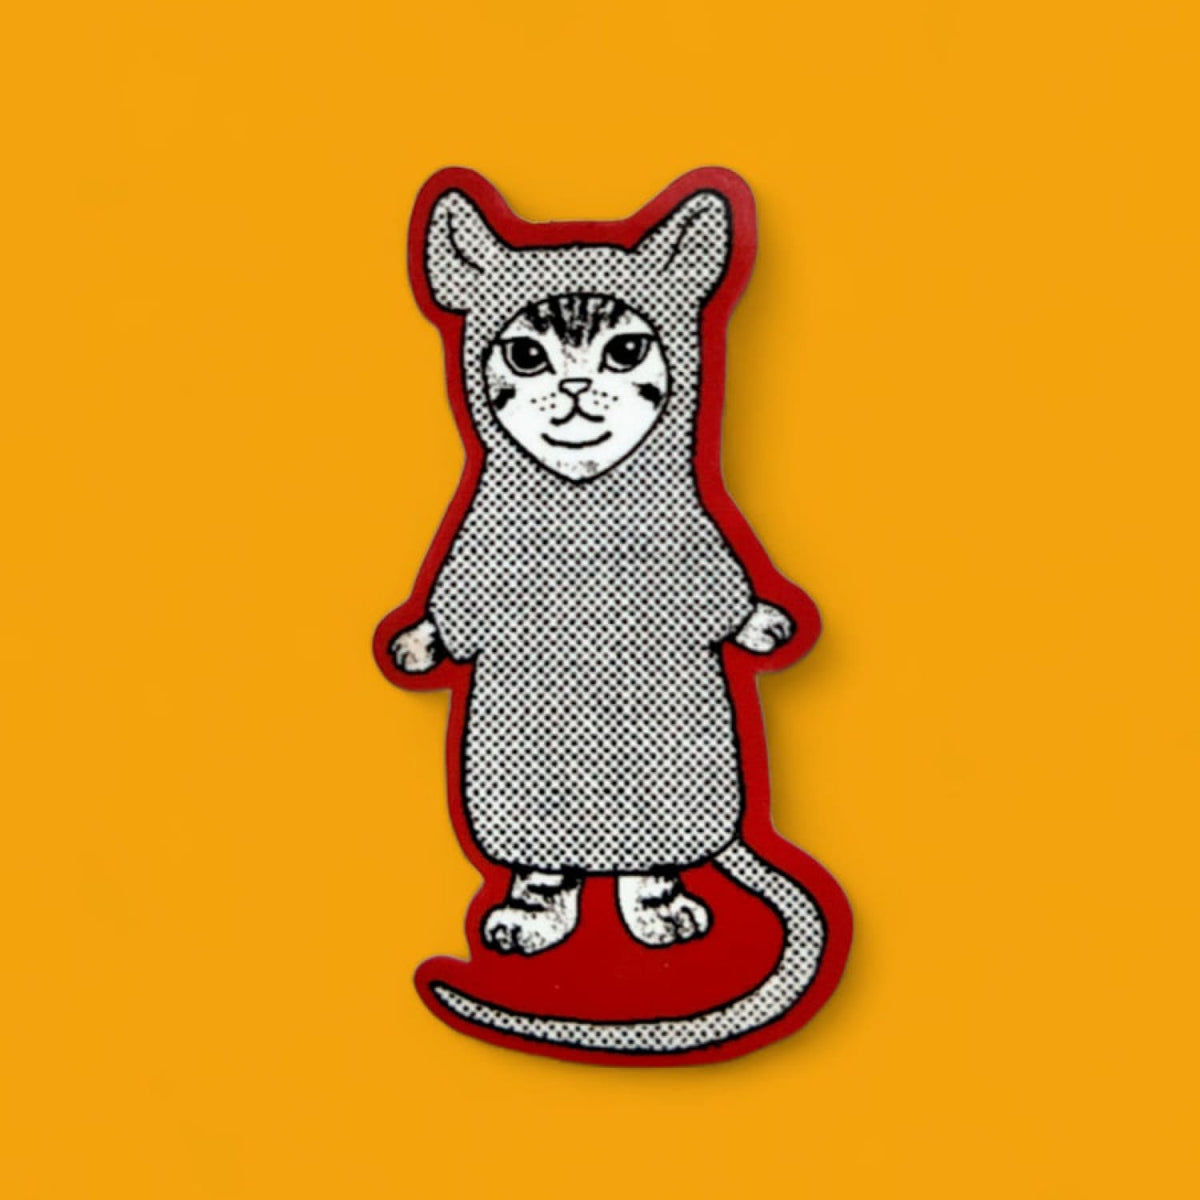 Friends Nyc Cat Rat Sticker Cat - Lover Gifts - Novelty